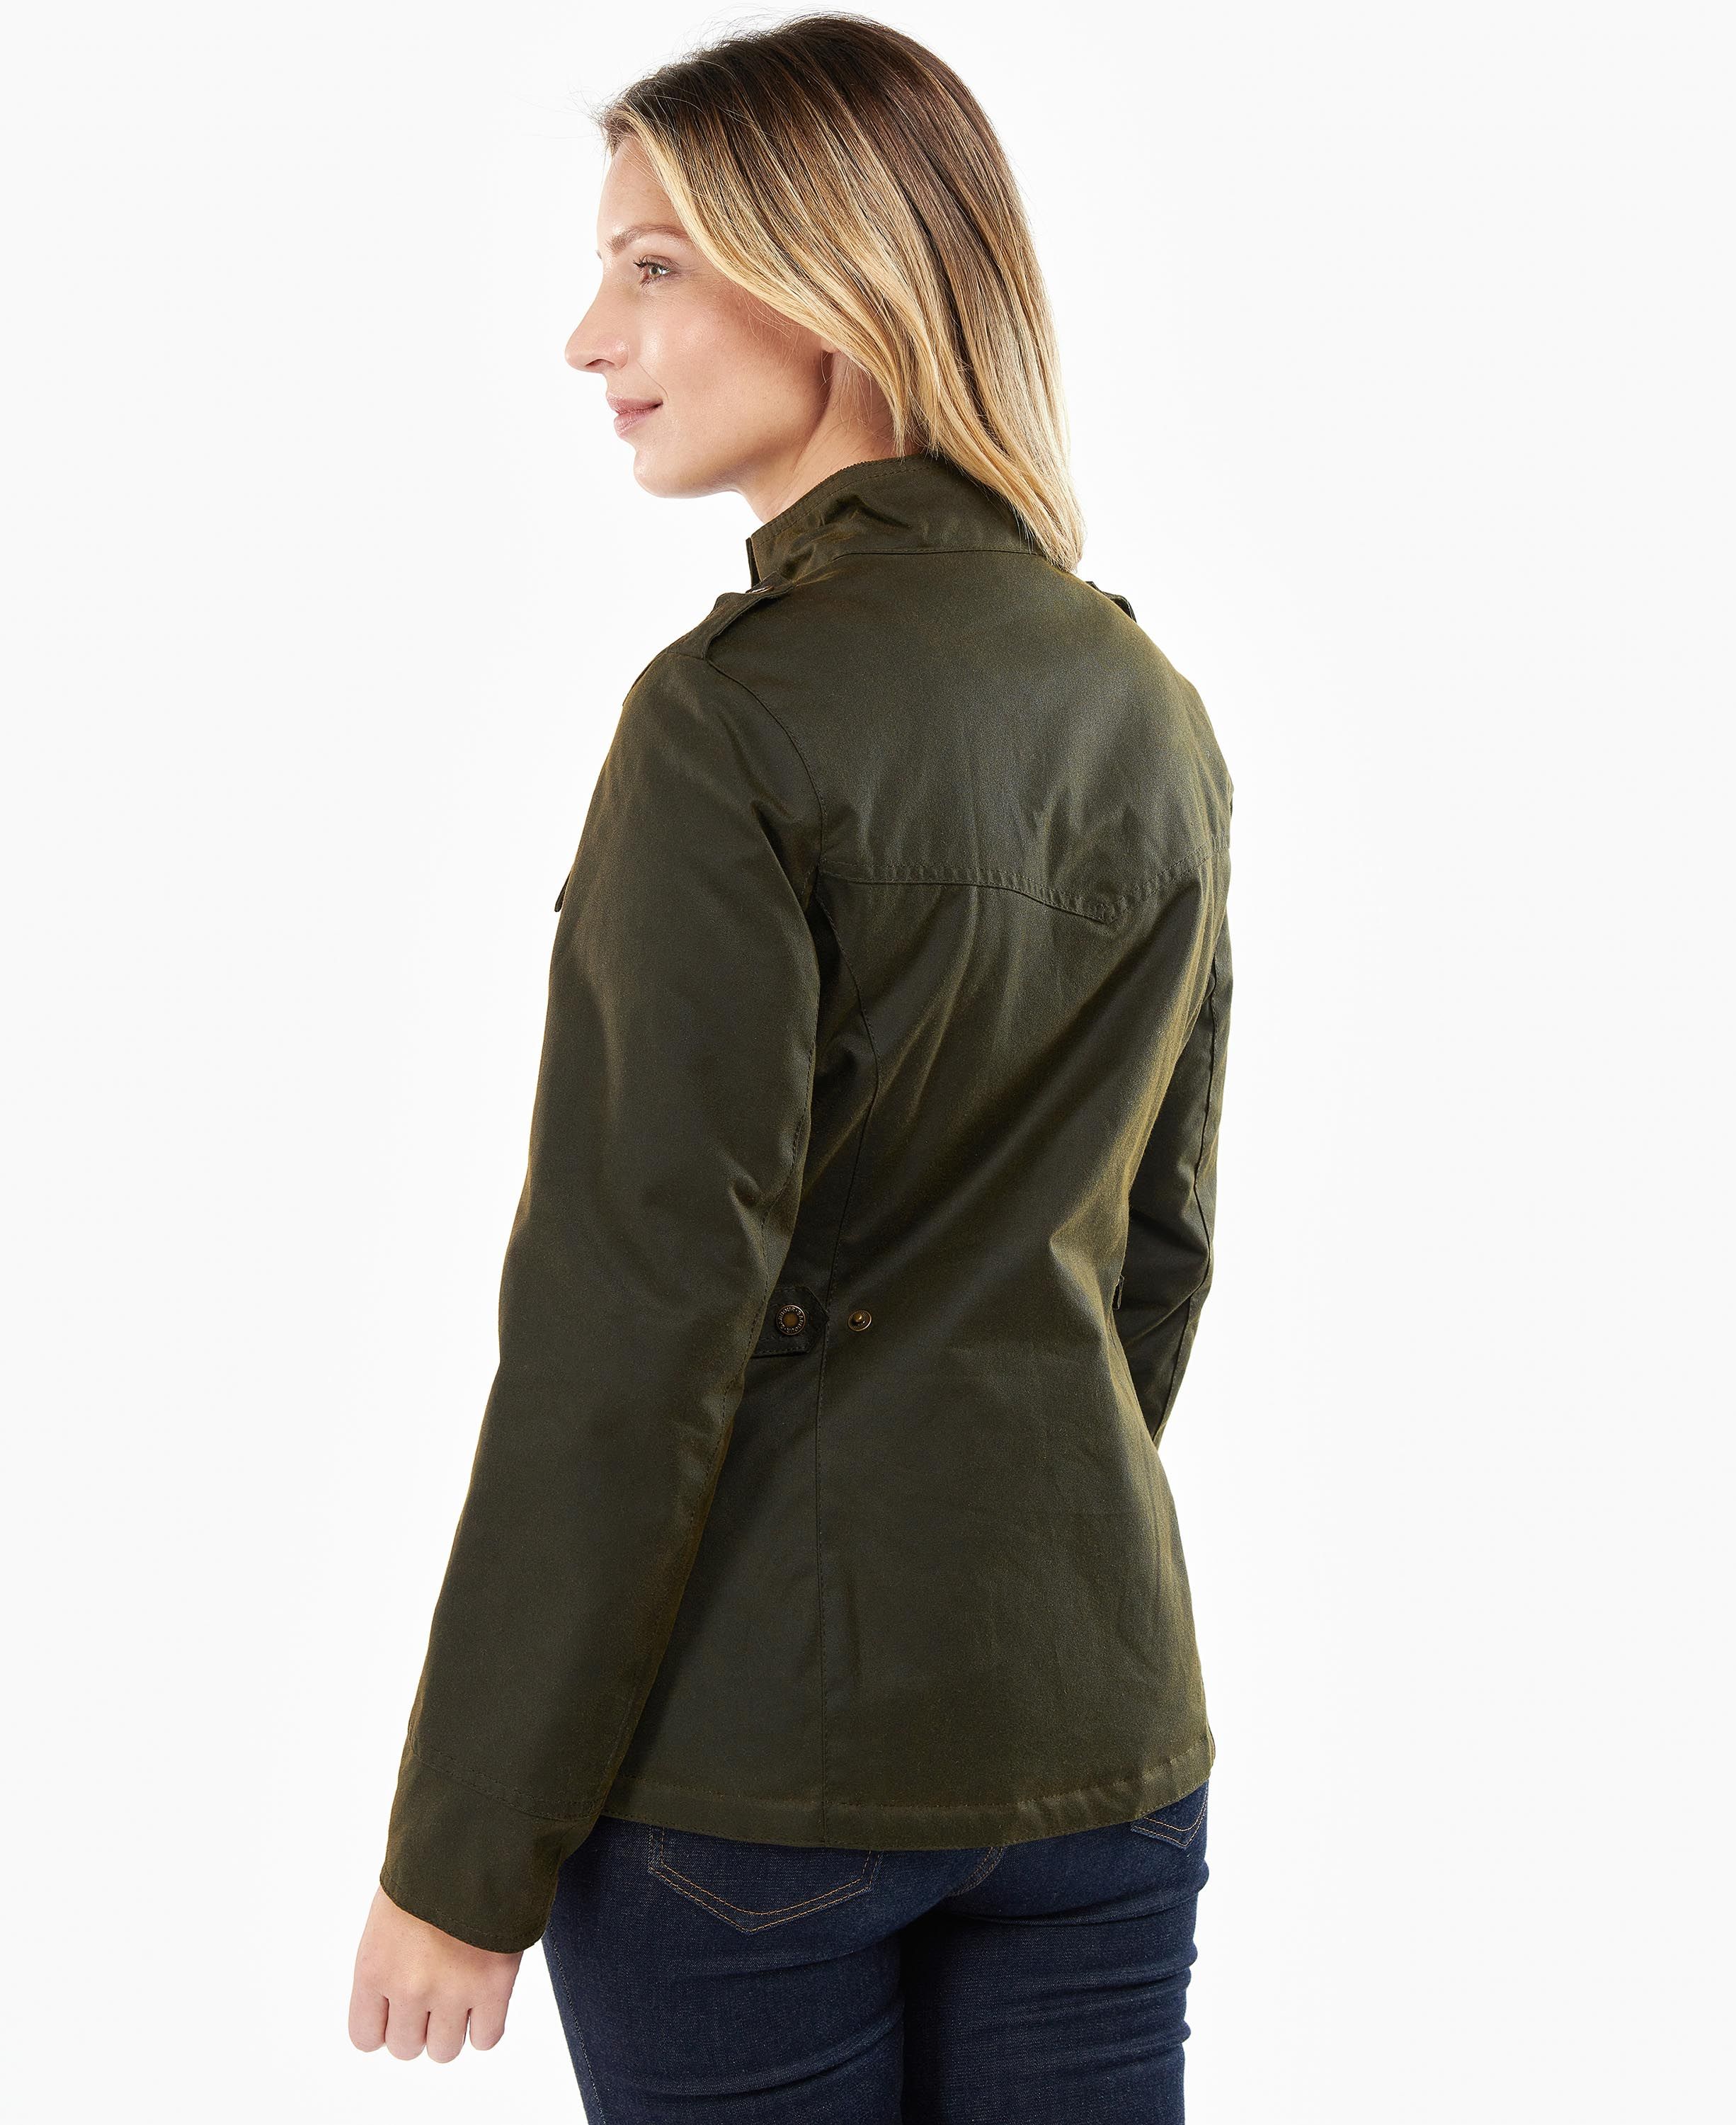 Barbour Women's Winter Defence Wax Jacket - 6 - Olive / Classic